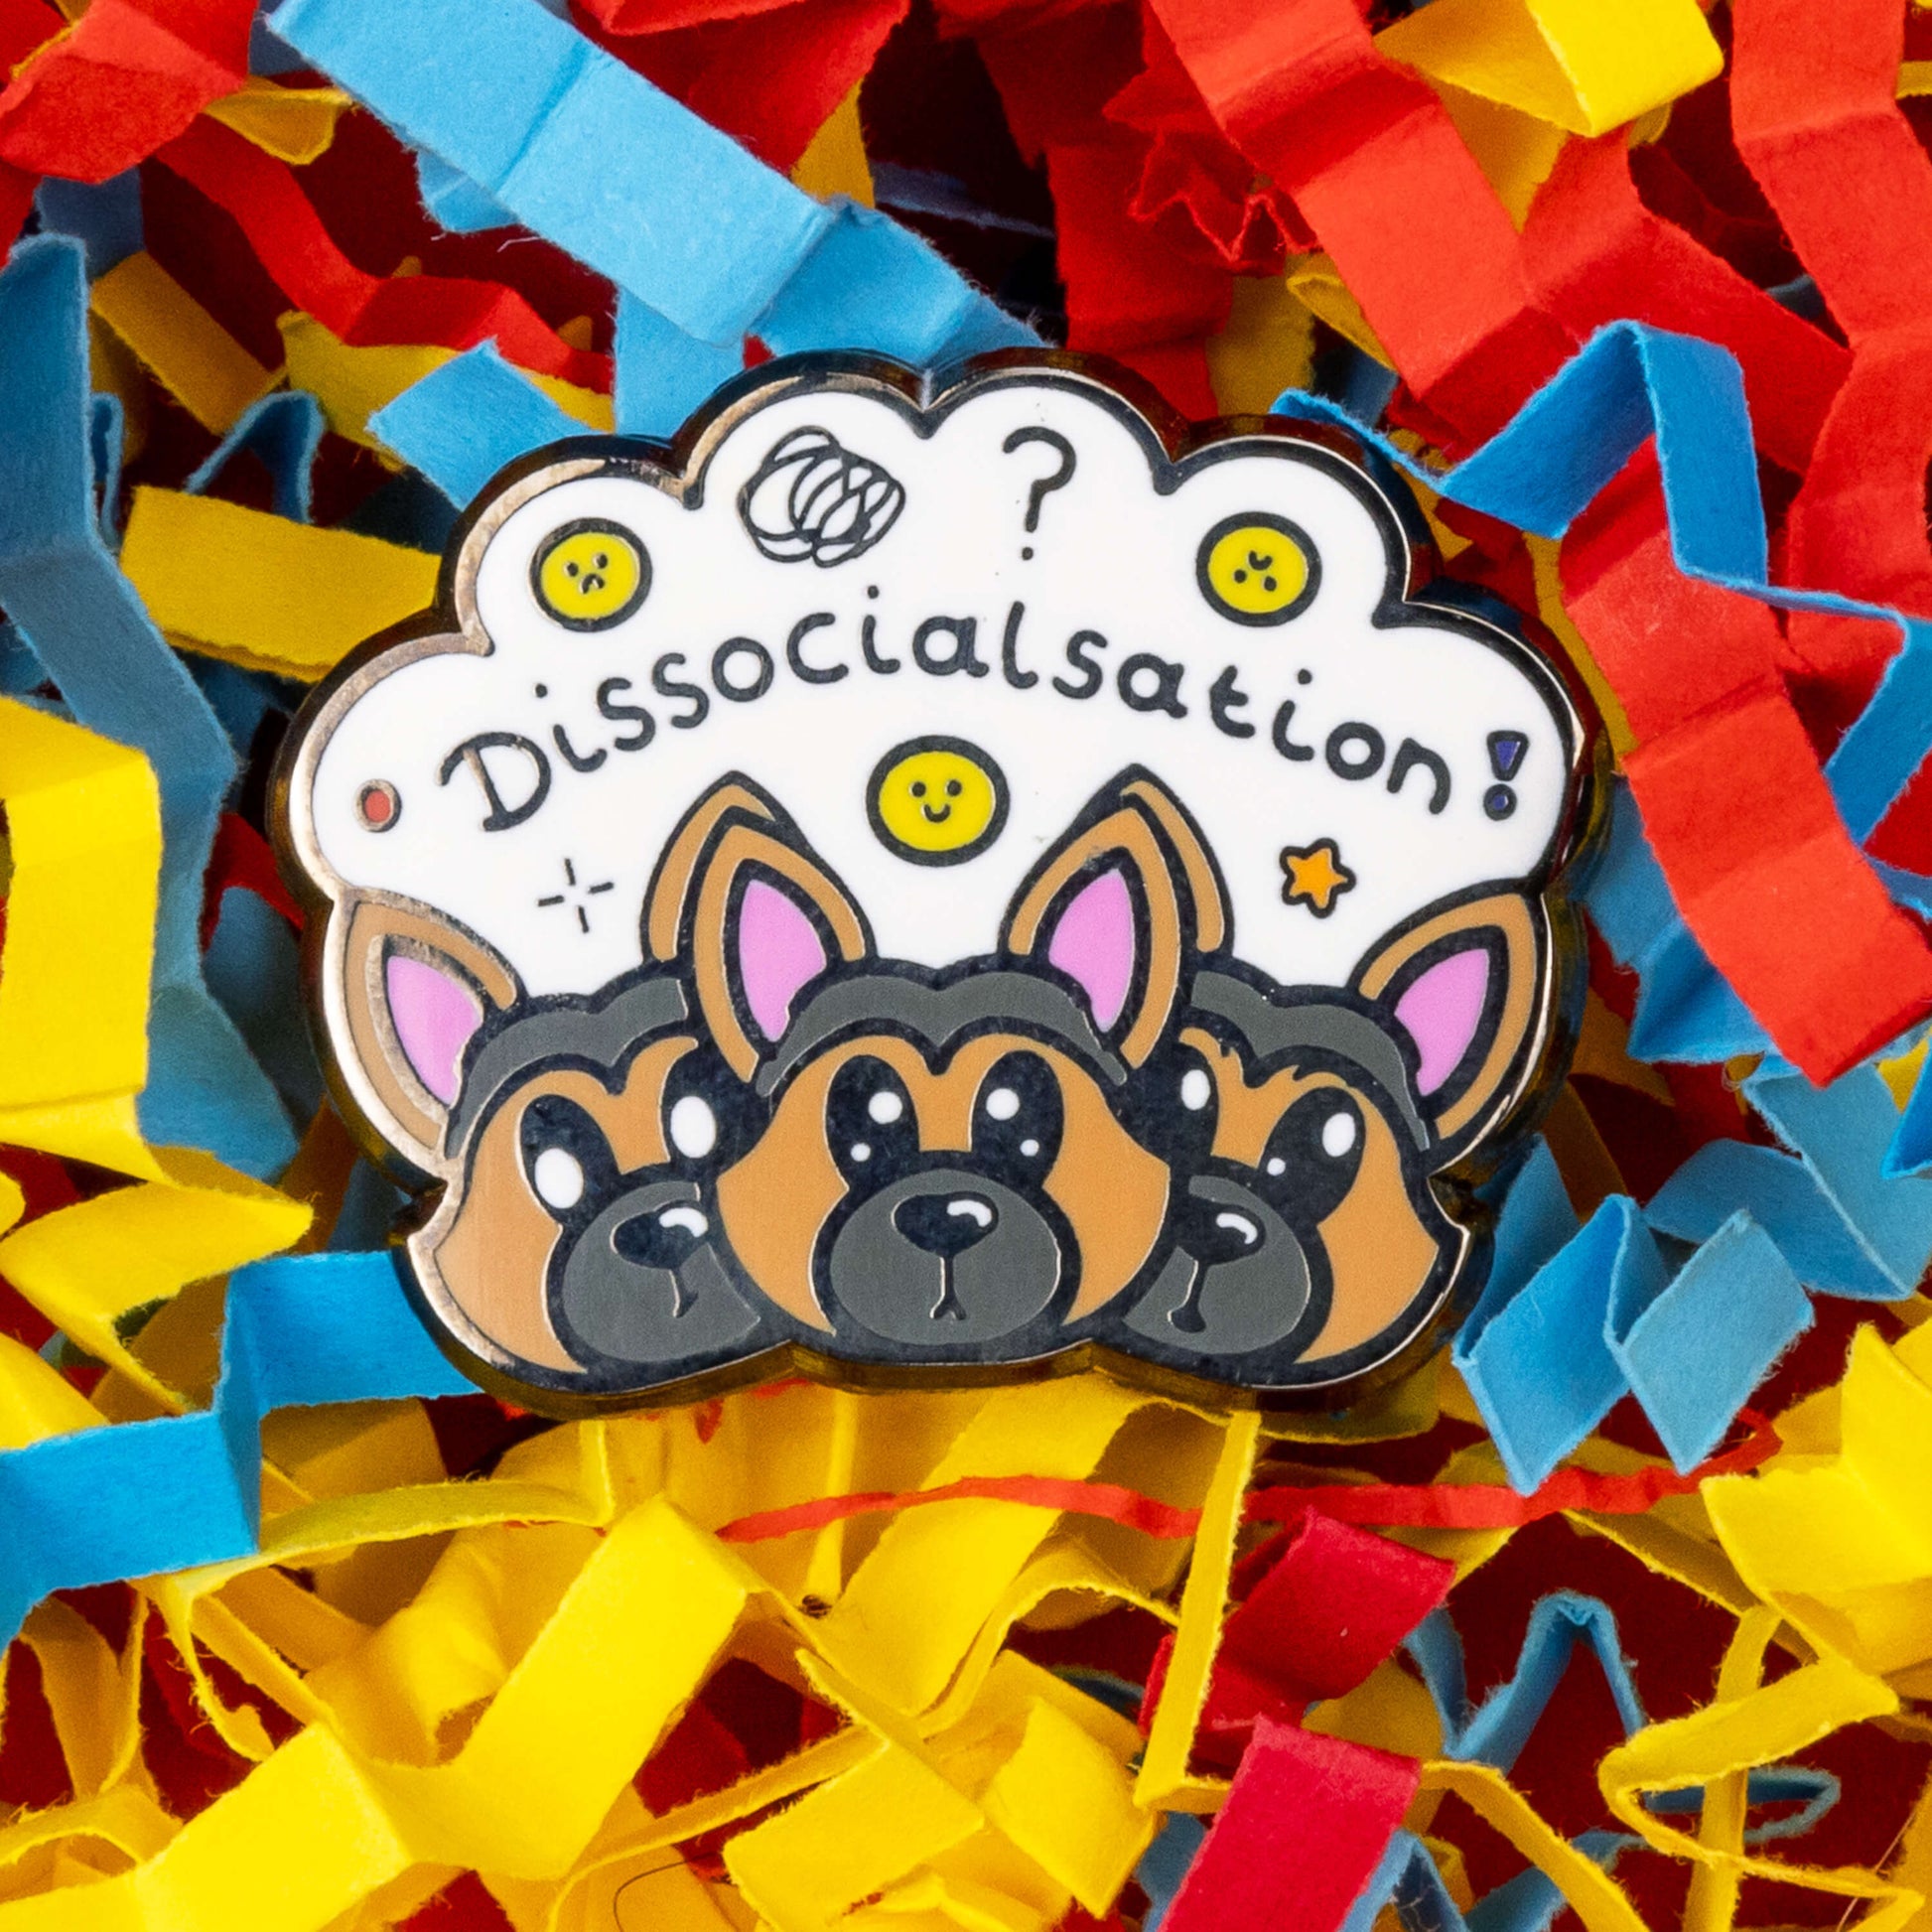 The Dissocialsation Enamel Pin - Dissociation on a red, blue and yellow card confetti background. Three confused brown and black Alsatian dog heads with their ears perked up, above them is a white cloud with sad and happy yellow faces, sparkles, question marks and black text reading 'dissocialsation!'. The design is raising awareness for dissociation.